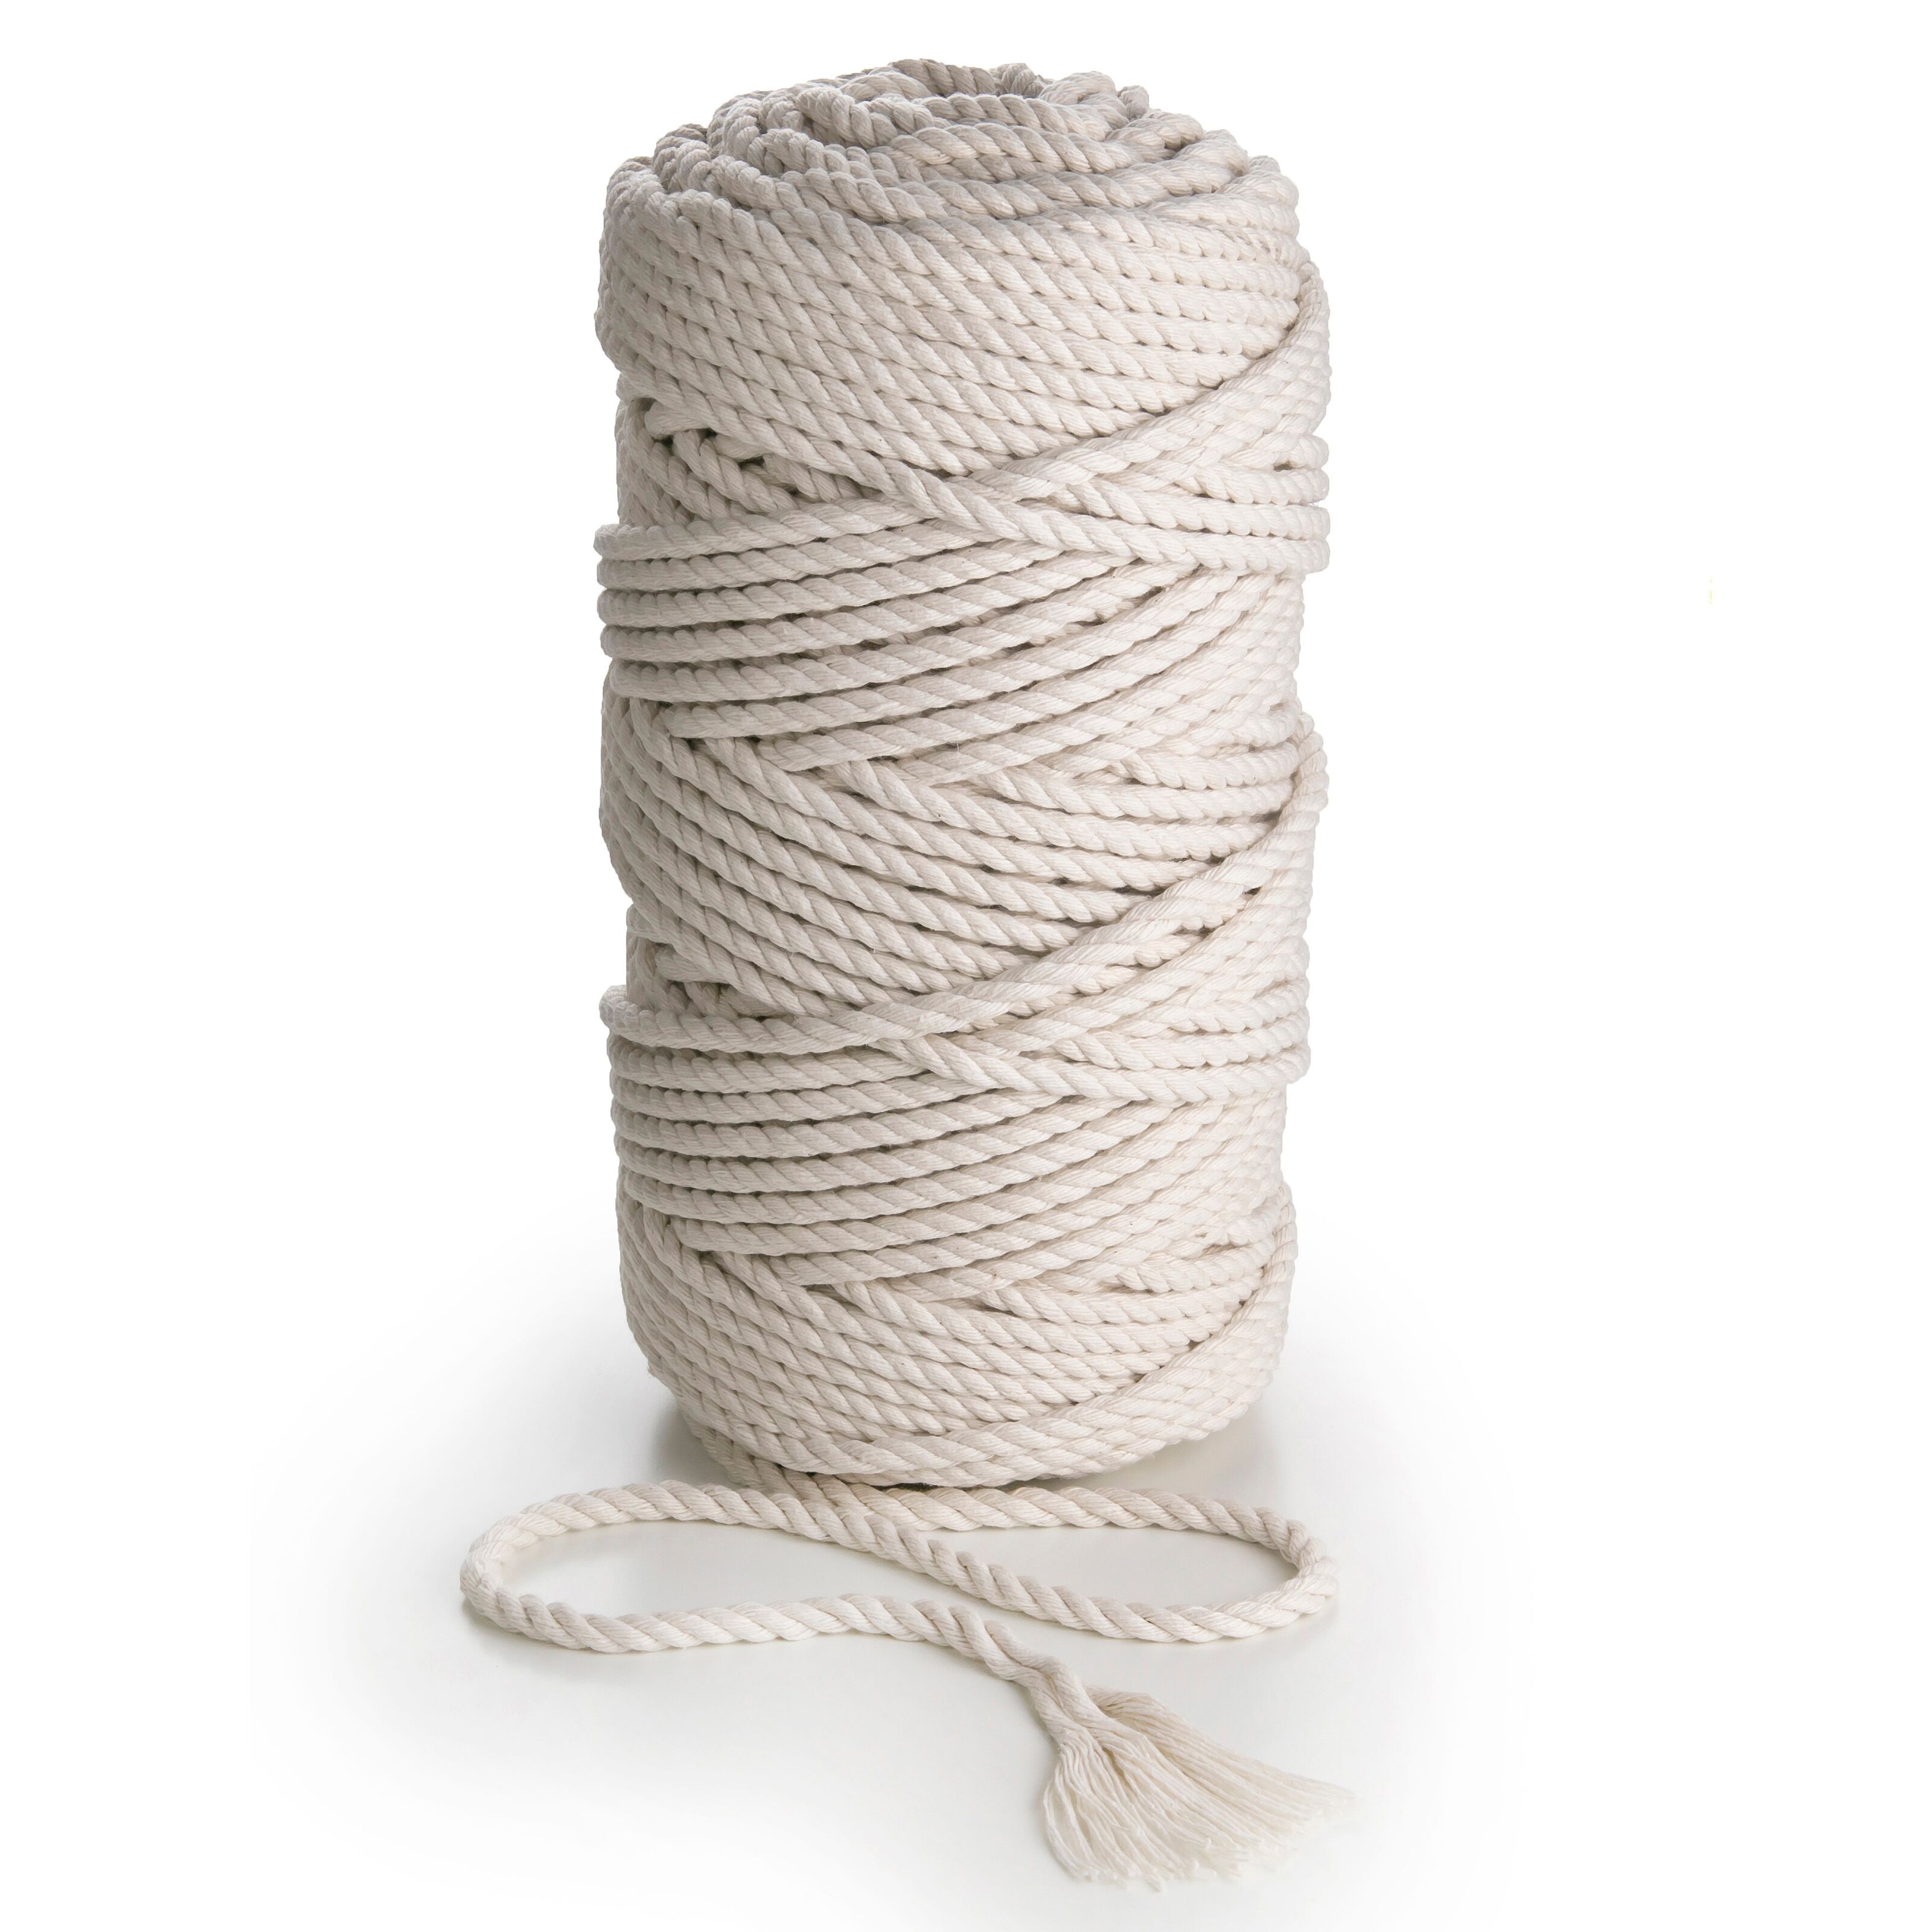 Blisstime Macrame Cord 3mm x 500Yards |Natural Cotton Macrame Rope|3 Strand Twisted Cotton Cord | Soft Undyed Cotton Rope for Wall Hangings Plant